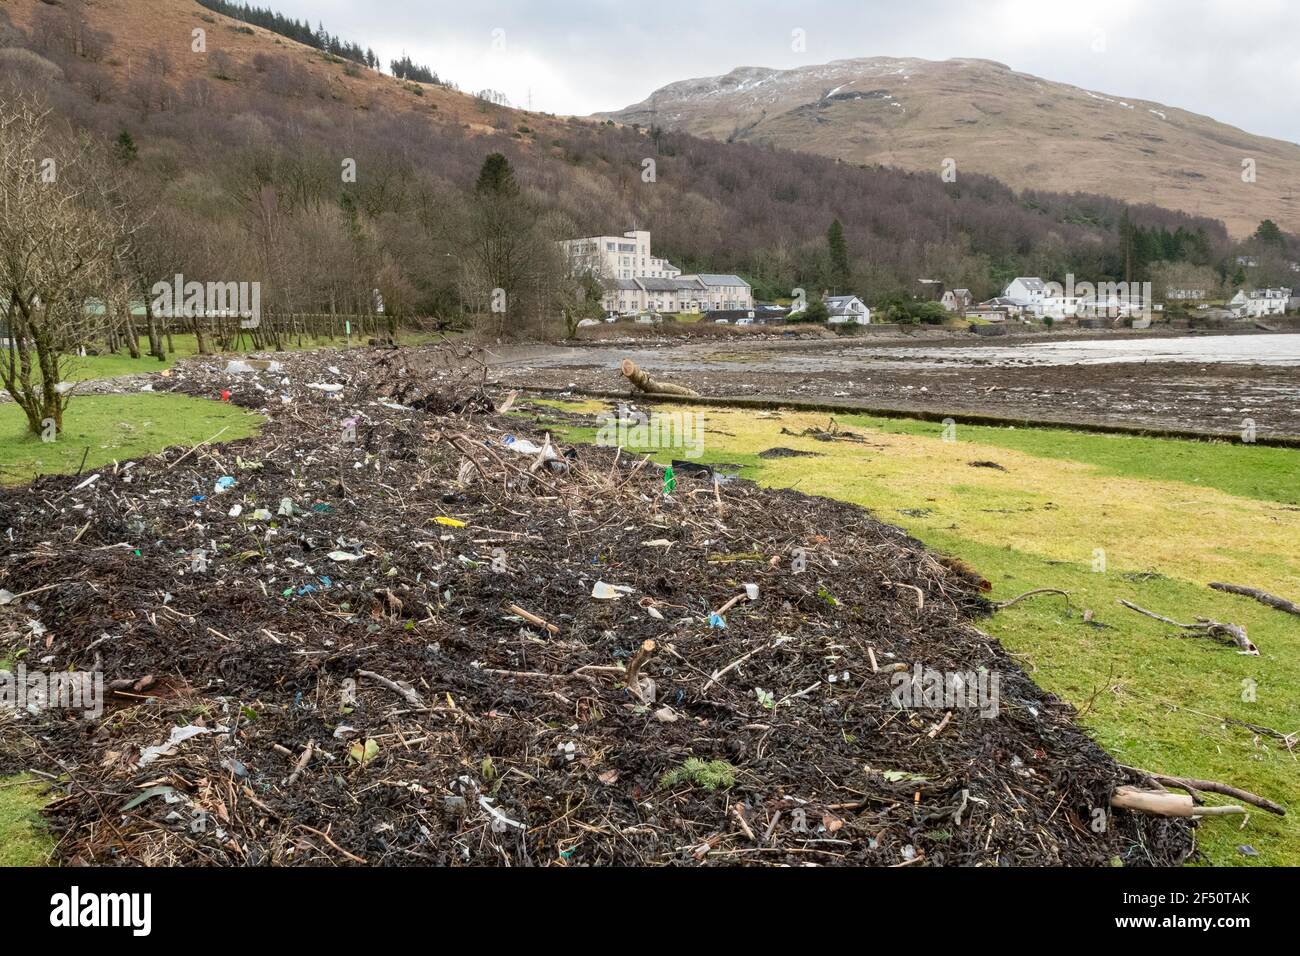 Marine litter including plastic washed up on the shores of Arrochar at the head of Loch Long, Scotland, UK Stock Photo